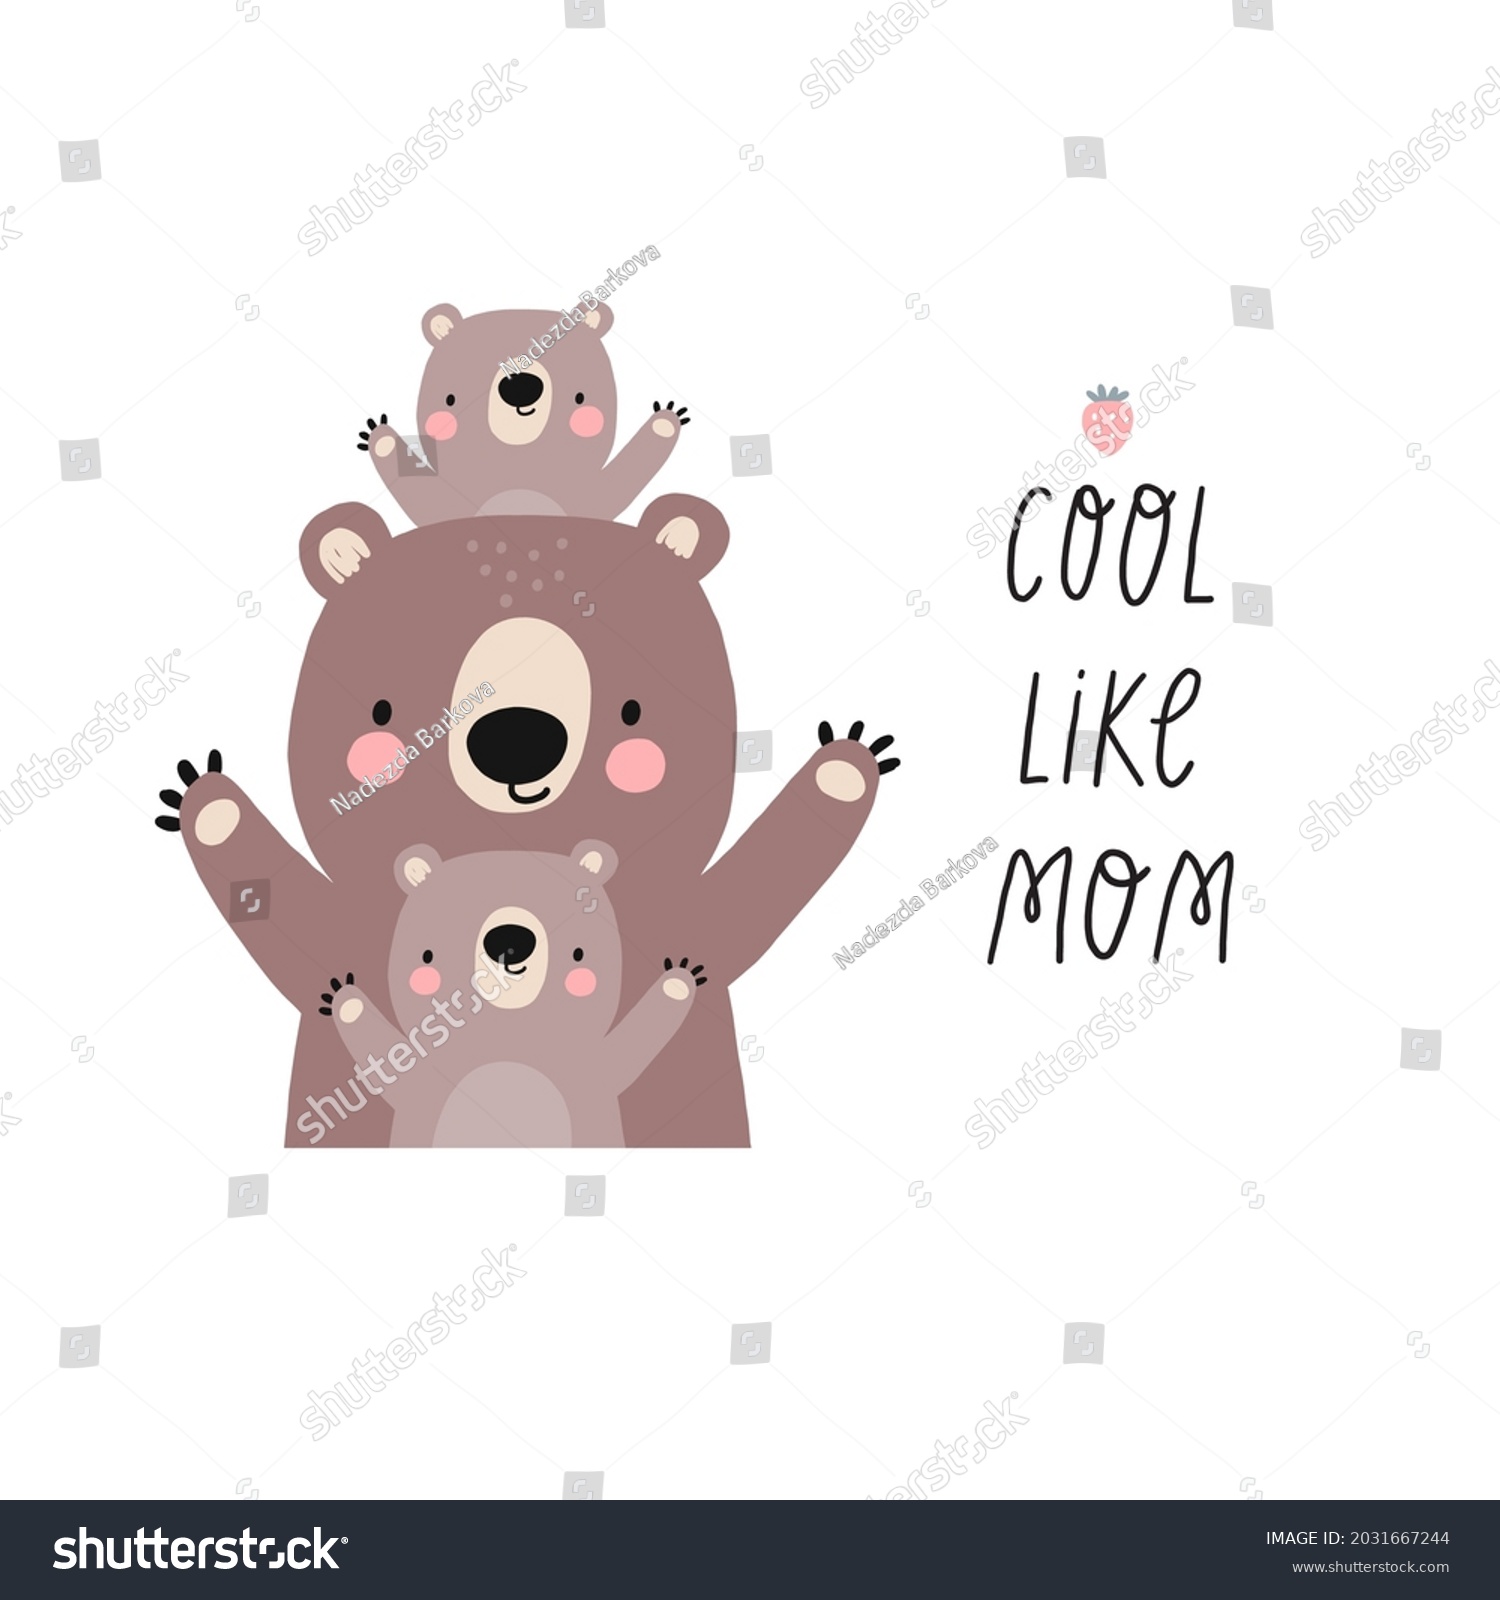 SVG of Vector card with cute Bear. Flat style print for kids. Mom and baby cute cartoon Bear character. Mother's Day card. Hand drawn lettering - cool like mom svg